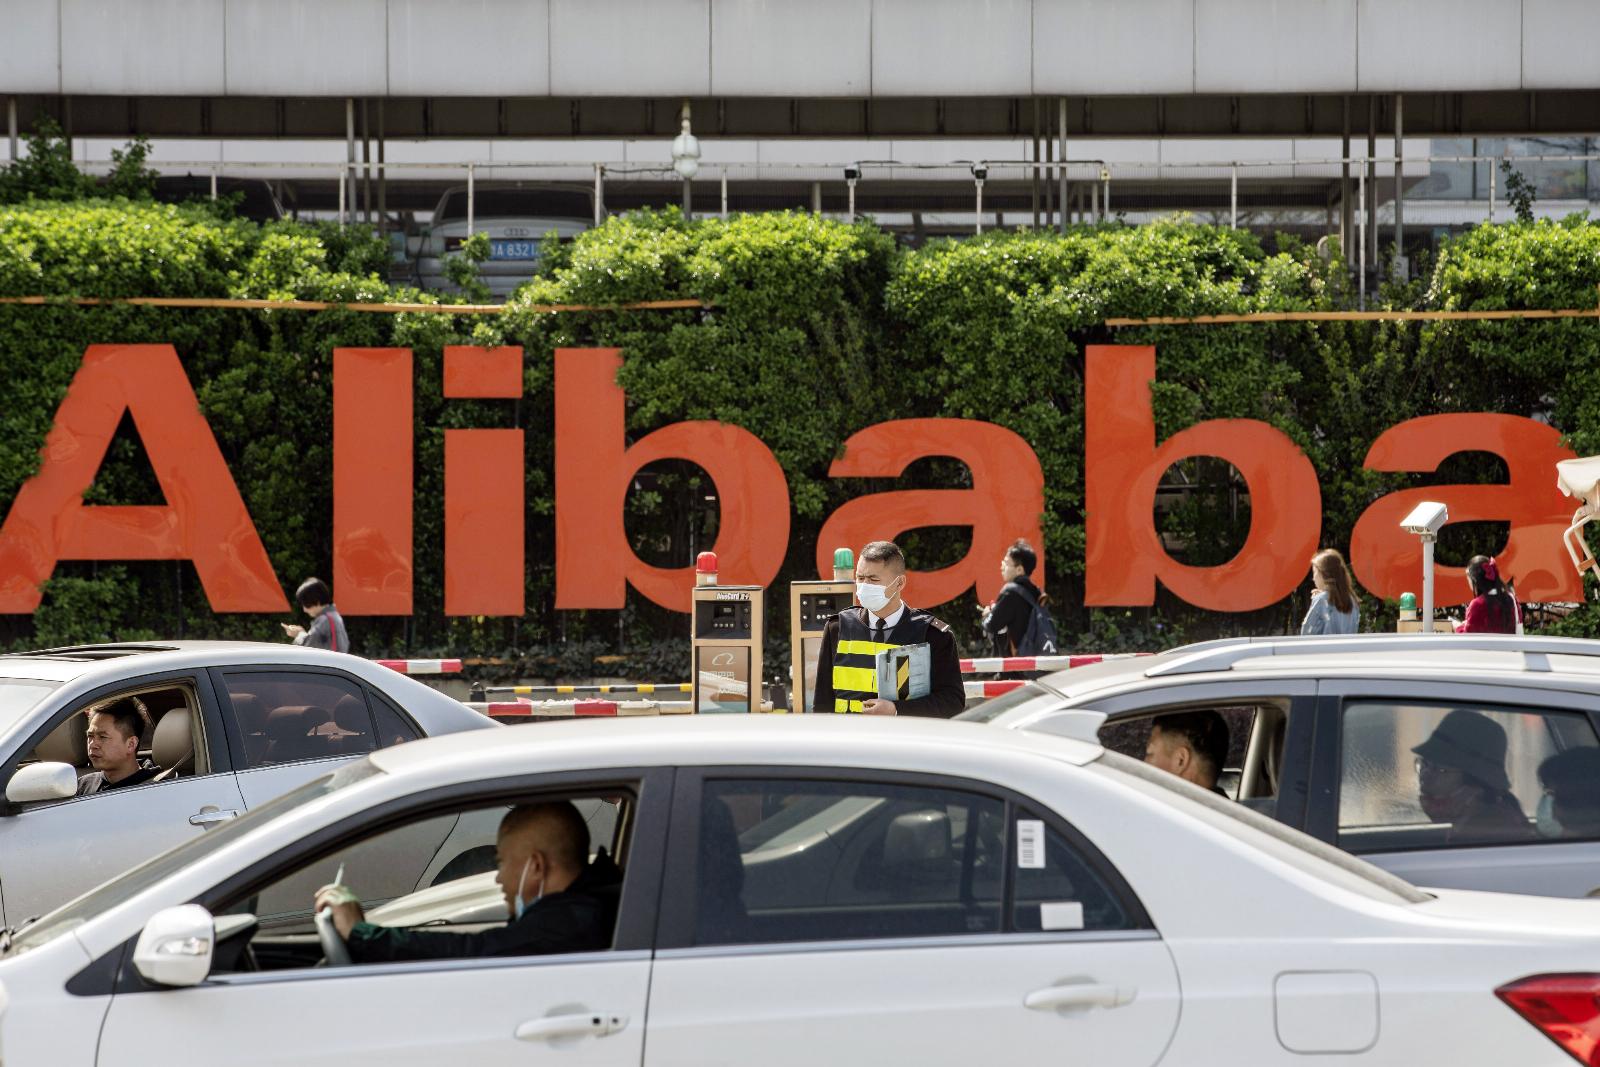 Alibaba unveils ambition for a copilot as China steps up scrutiny over generative AI